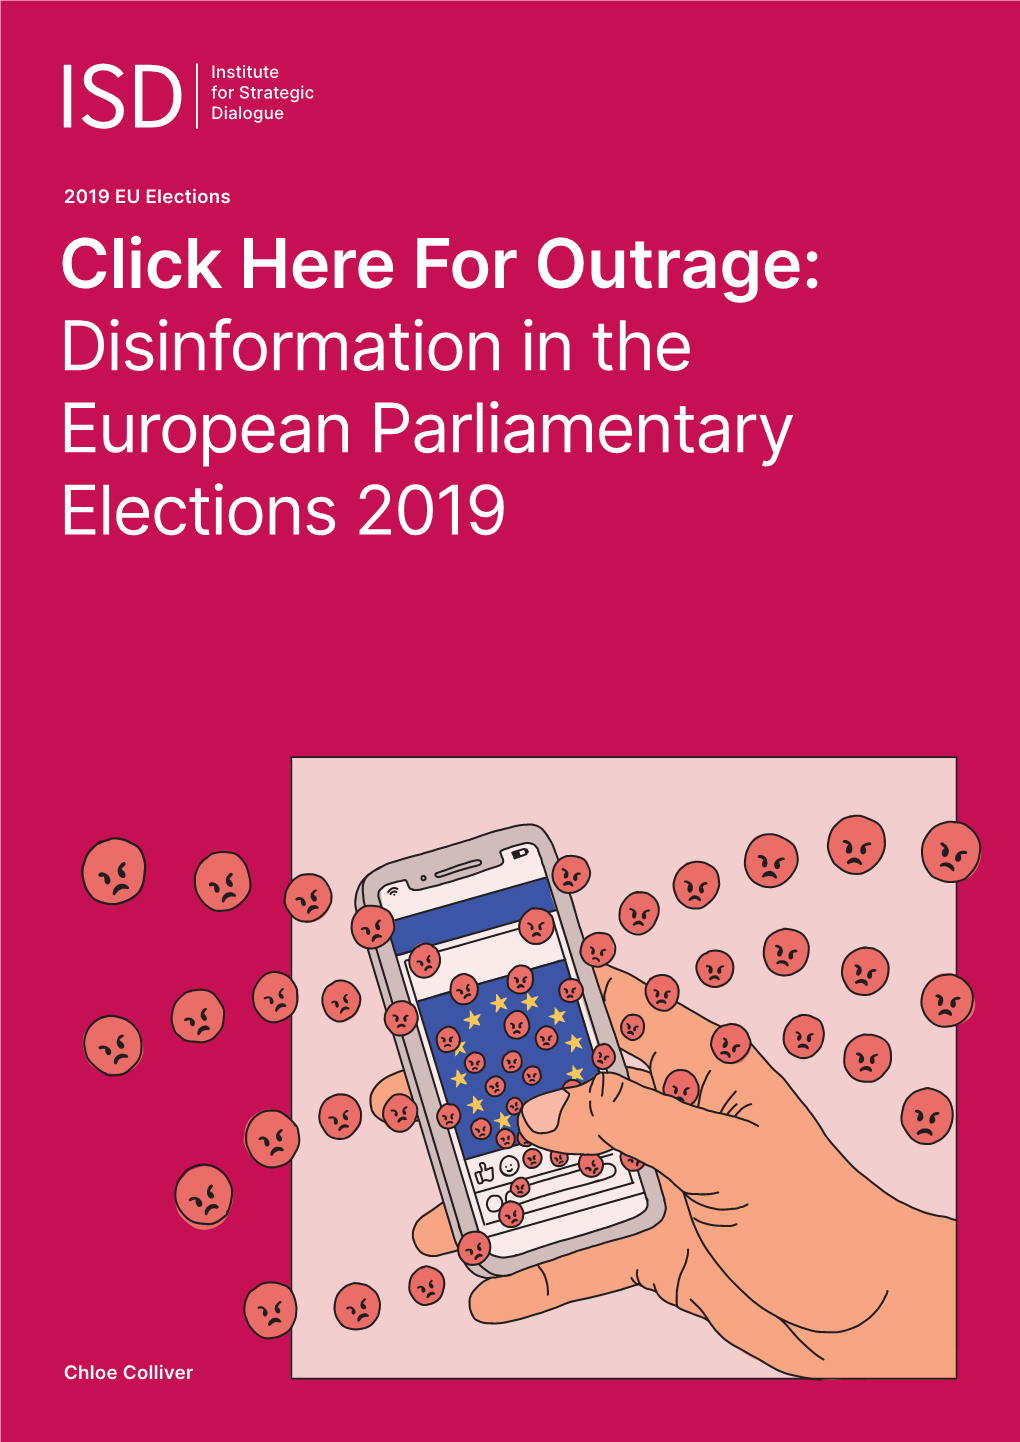 Click Here for Outrage: Disinformation in the European Parliamentary Elections 2019